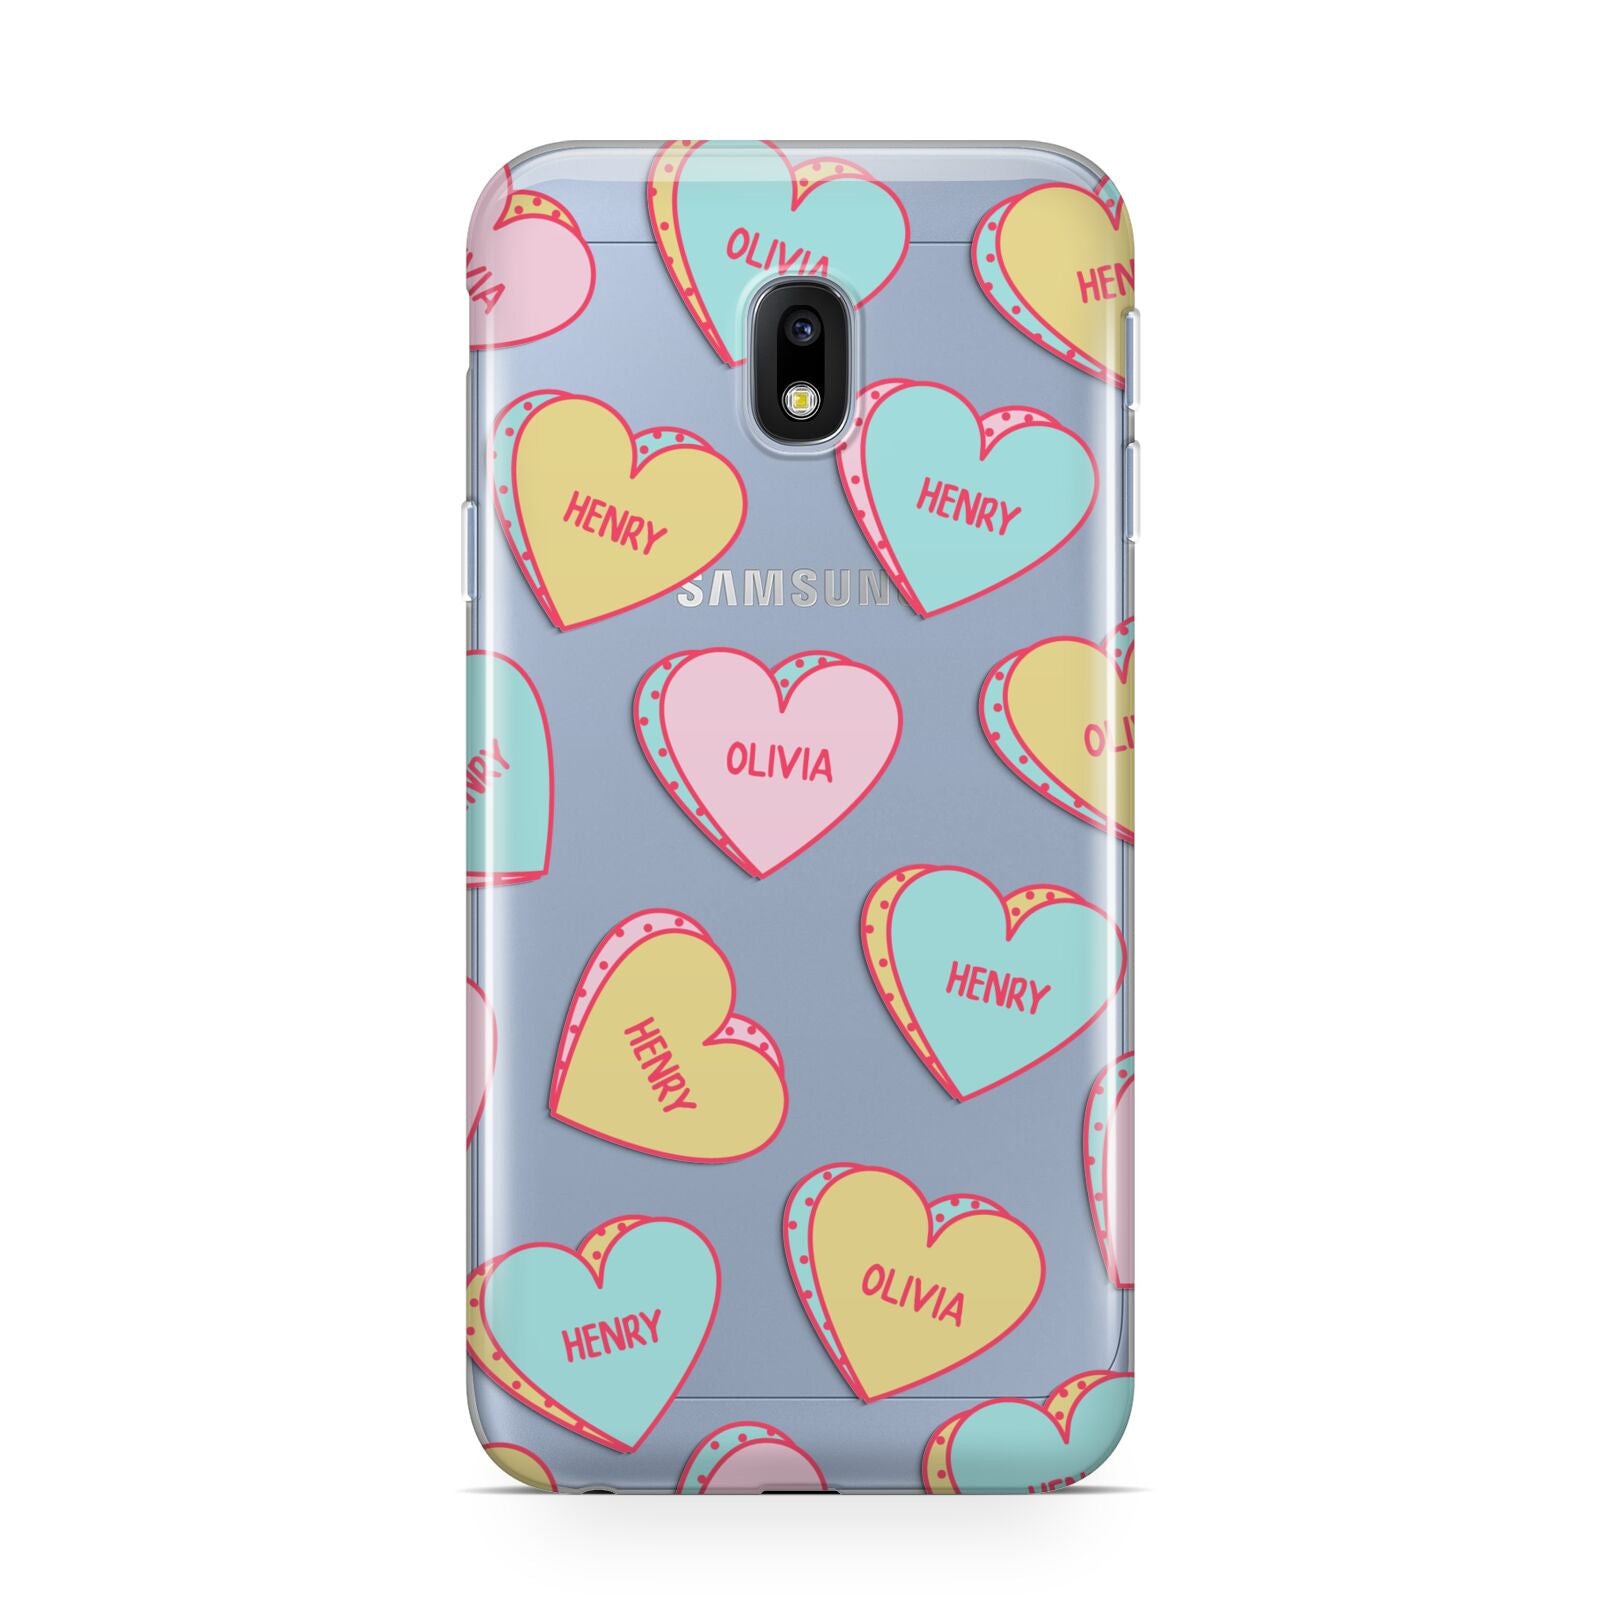 Personalised Heart Sweets Samsung Galaxy J3 2017 Case